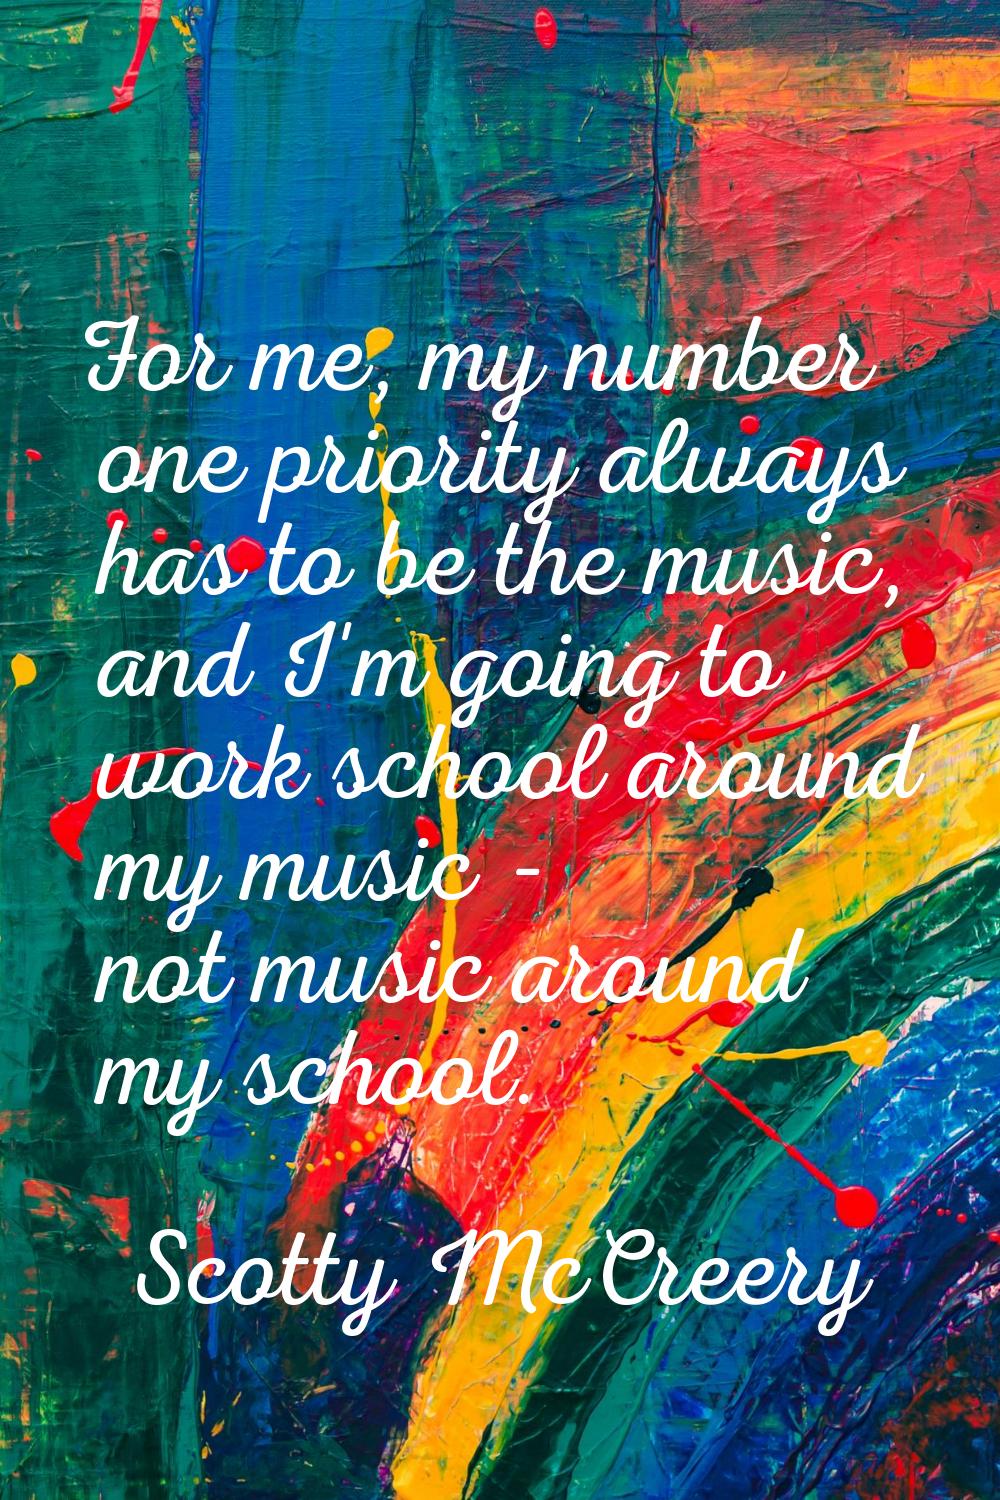 For me, my number one priority always has to be the music, and I'm going to work school around my m